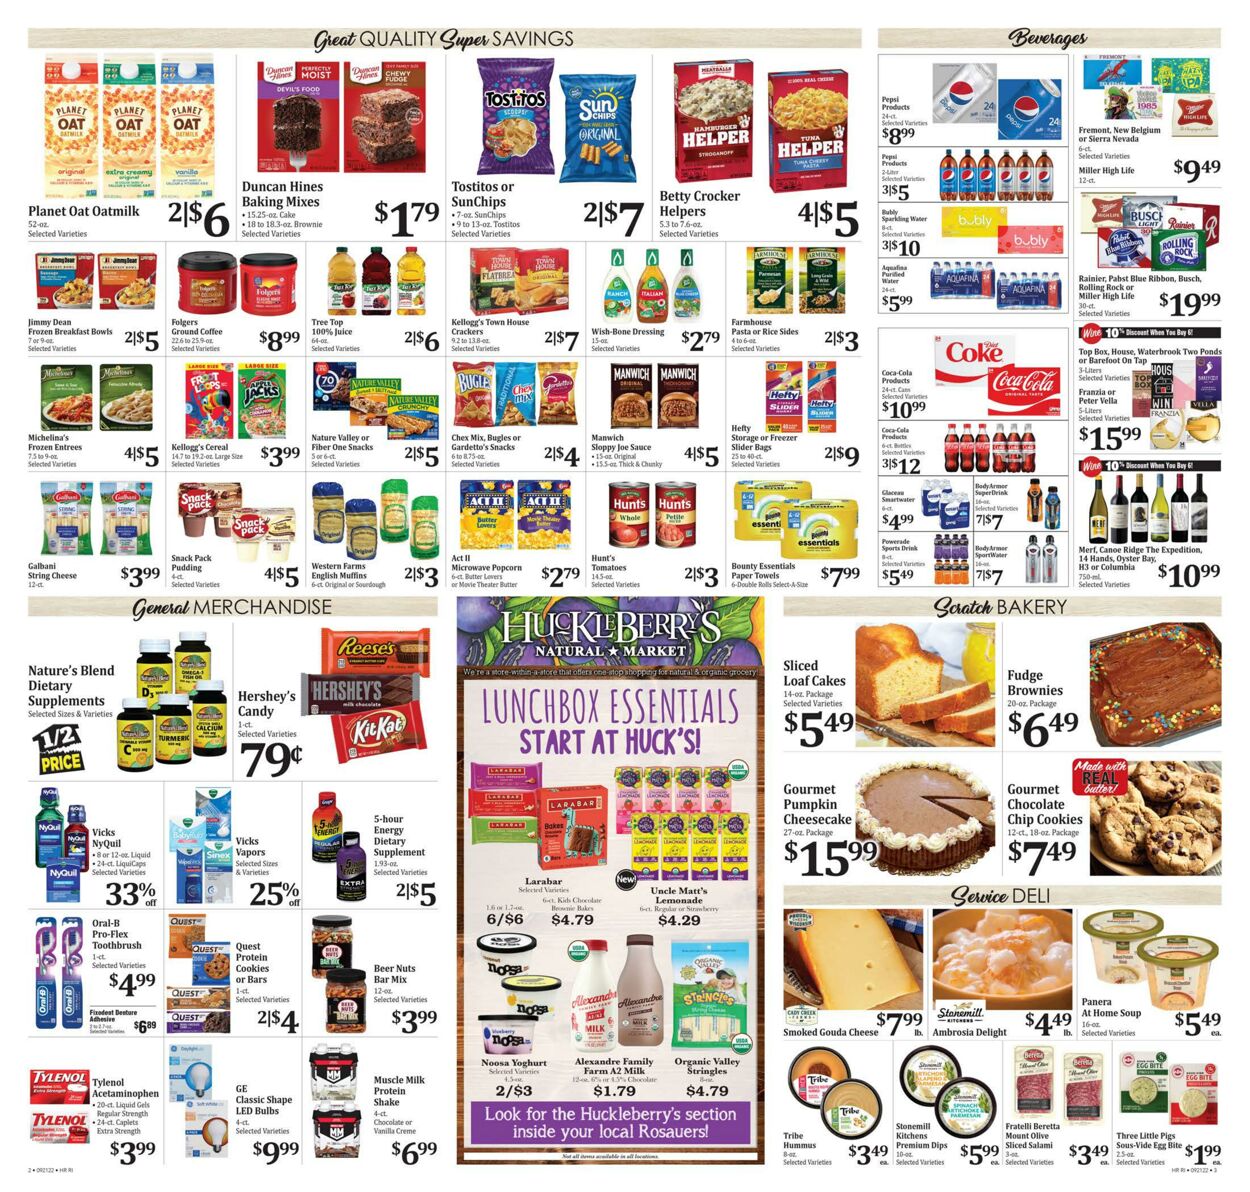 Weekly ad Rosauers 09/21/2022-09/27/2022